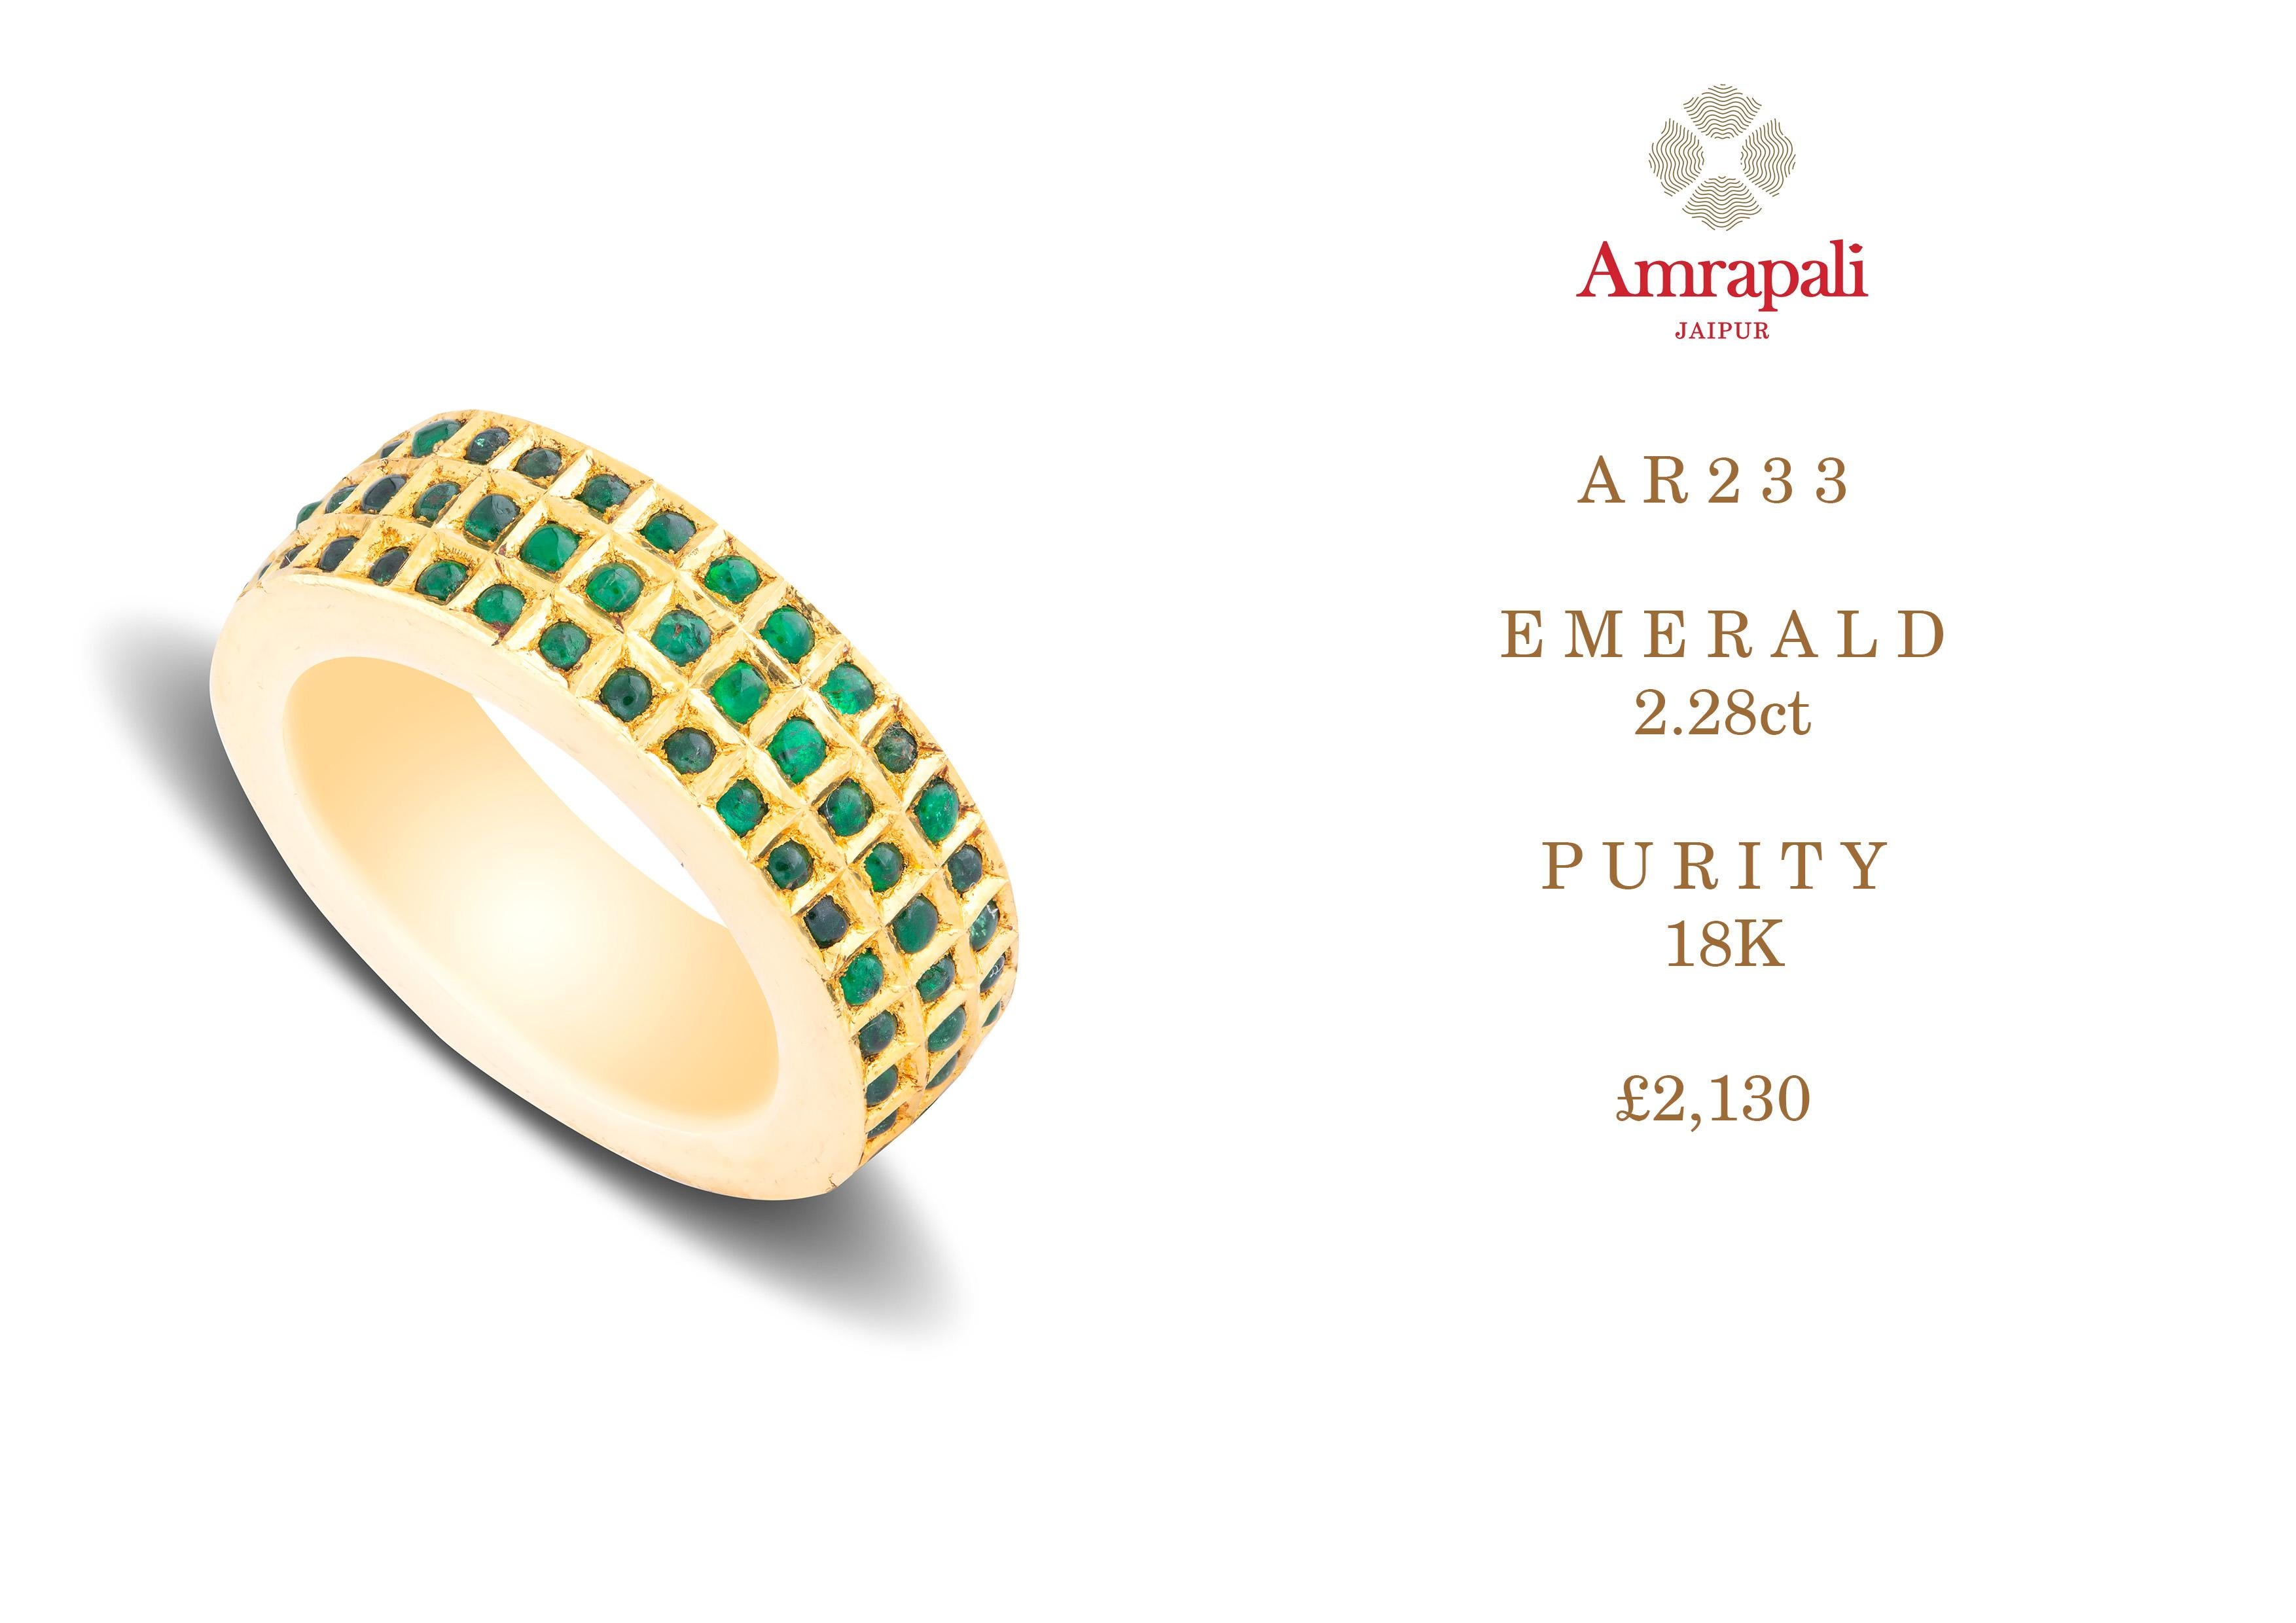 Amrapali Jewels 18k gold & Emerald ring

Emerald weight - 2.28ct

Ring size - 56.5


